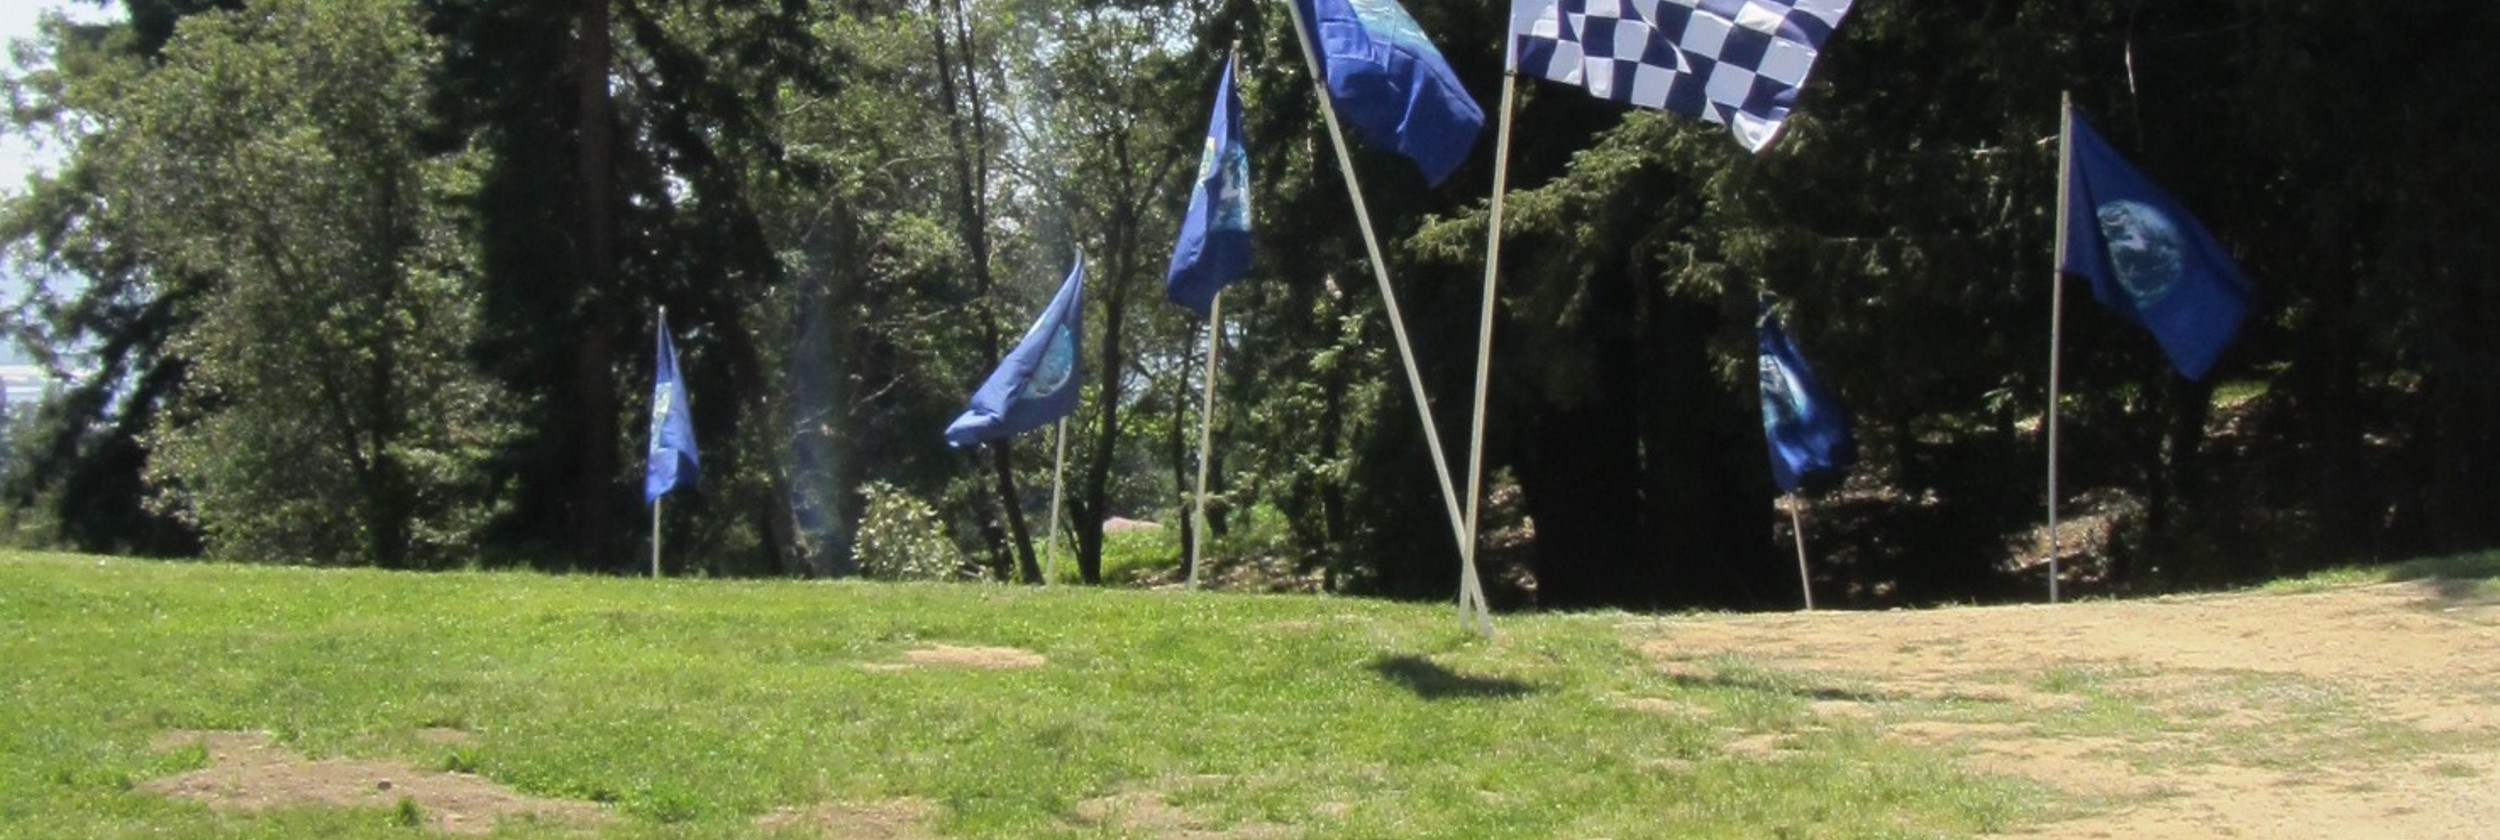 Flags in the field